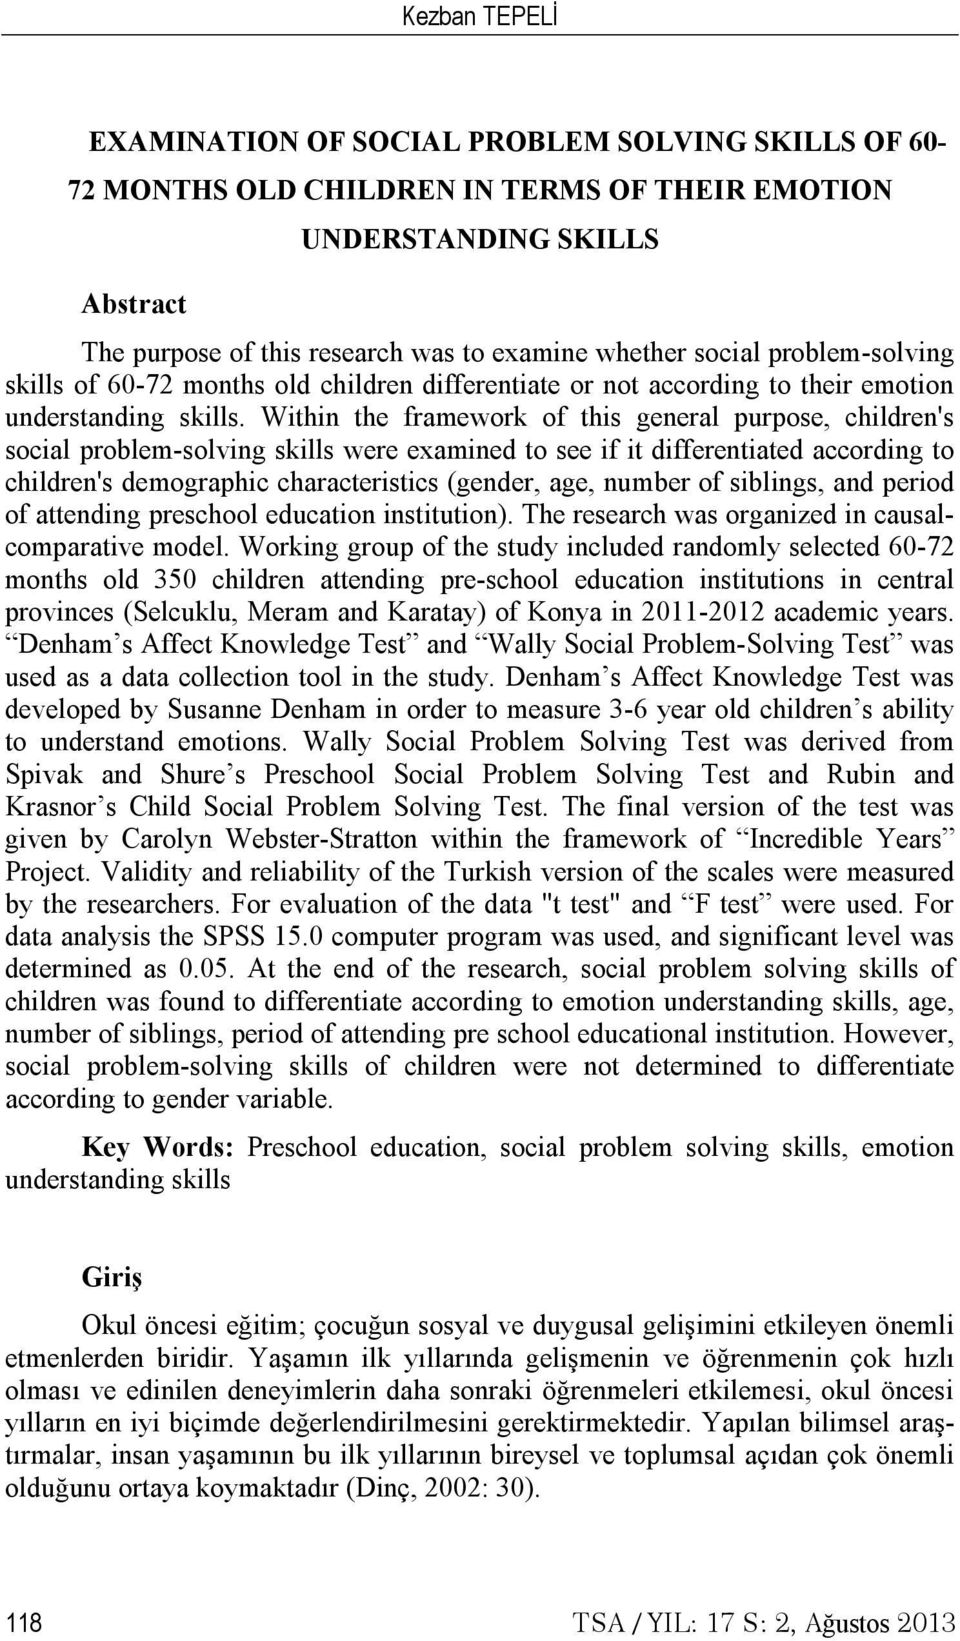 Within the framework of this general purpose, children's social problem-solving skills were examined to see if it differentiated according to children's demographic characteristics (gender, age,